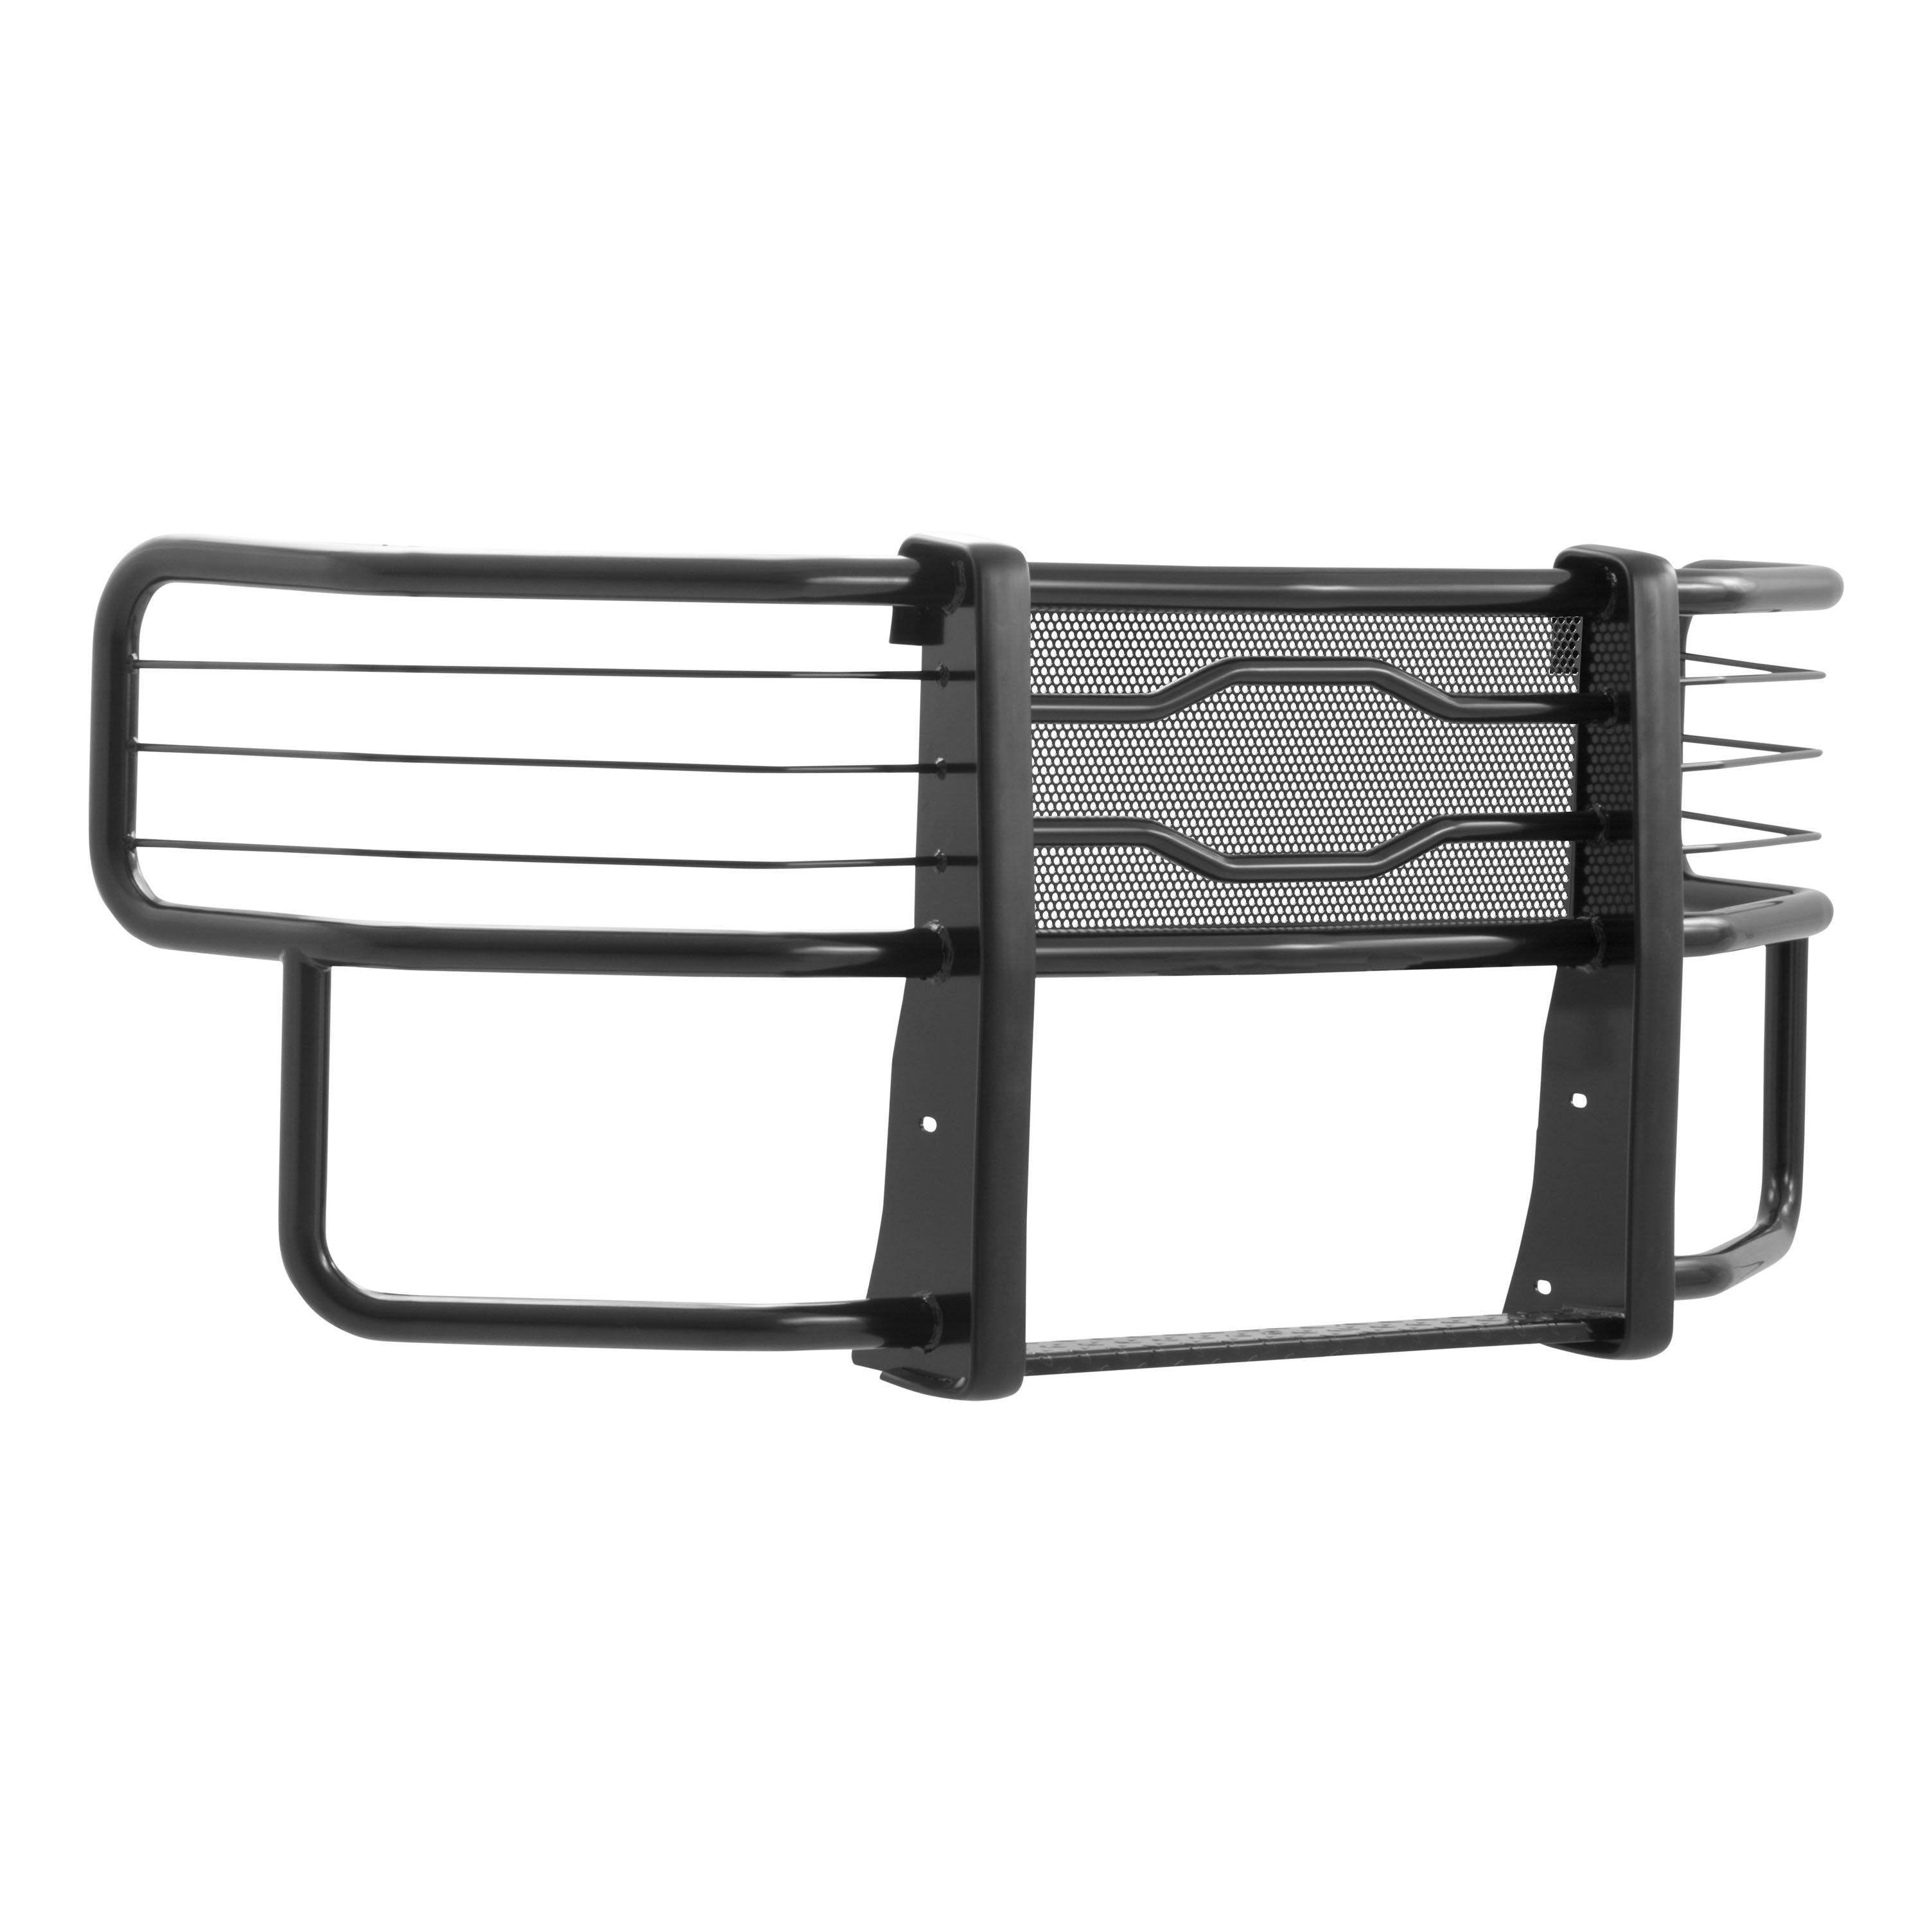 LUVERNE 320713 Prowler Max Grille Guard